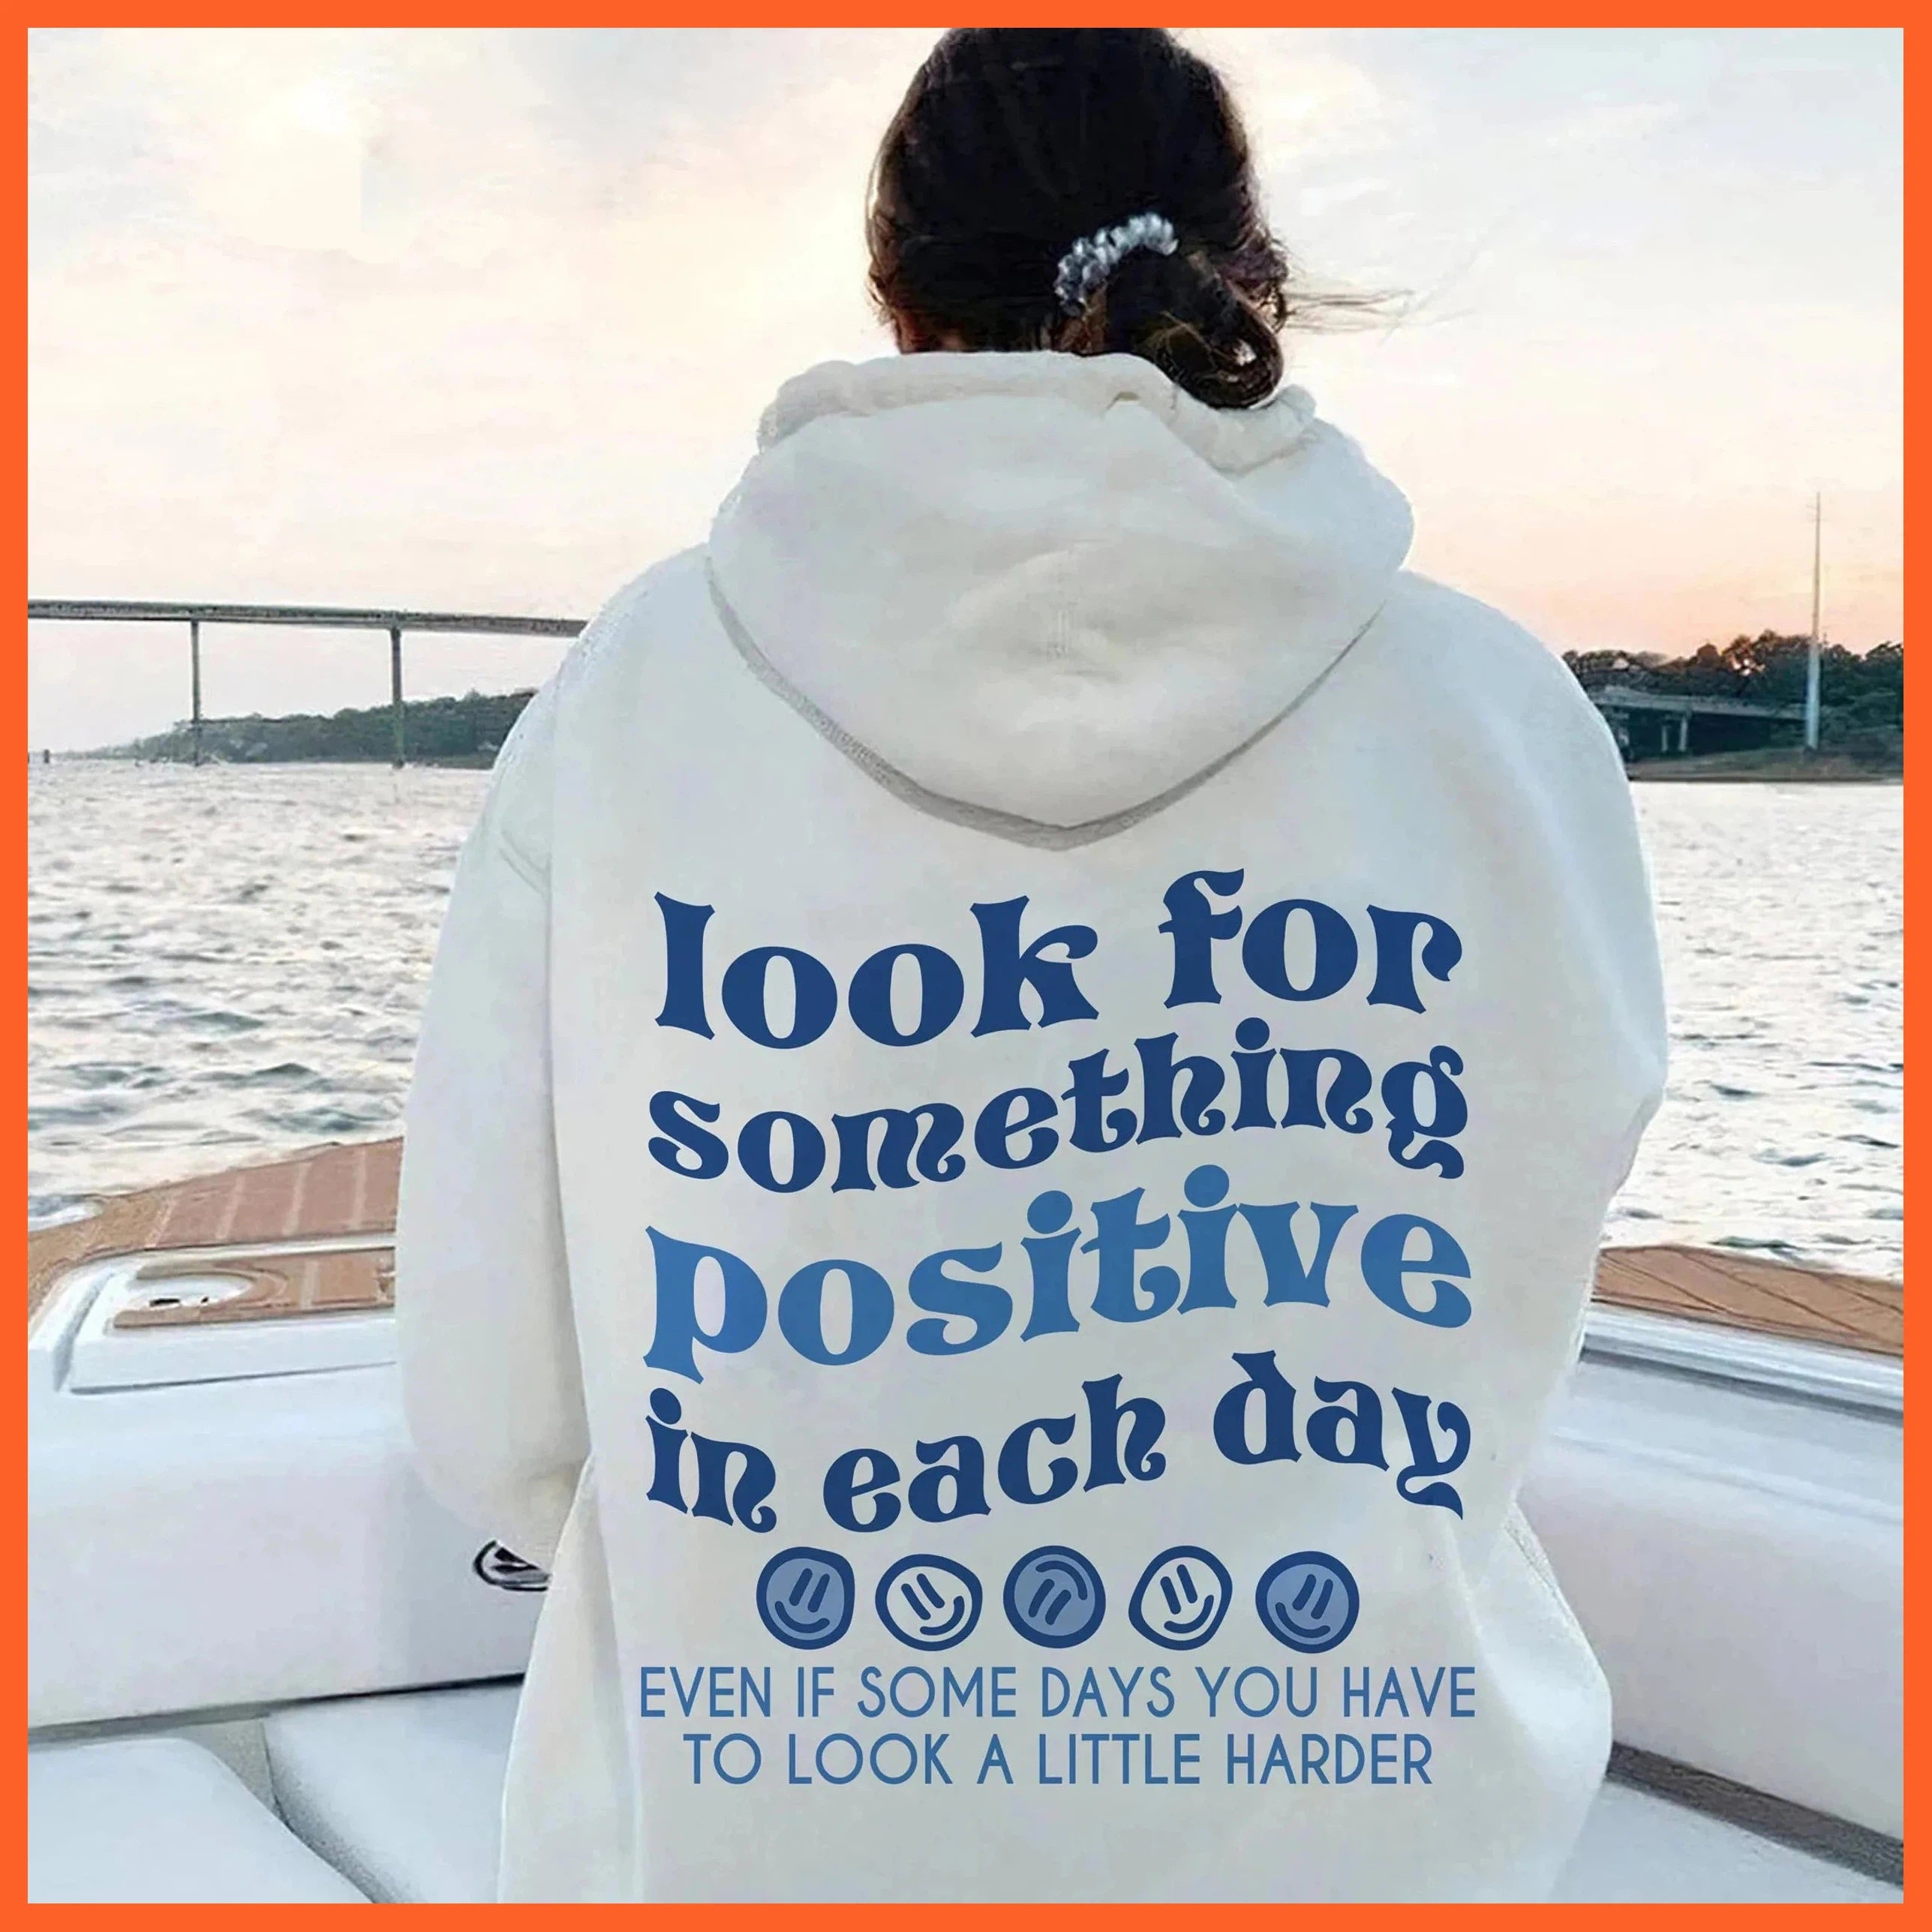 Look For Something Positive In Each Day Blue Print Women Hoodies All-Match Street For Unisex Autumn Pocket Sportswear Loose Tops